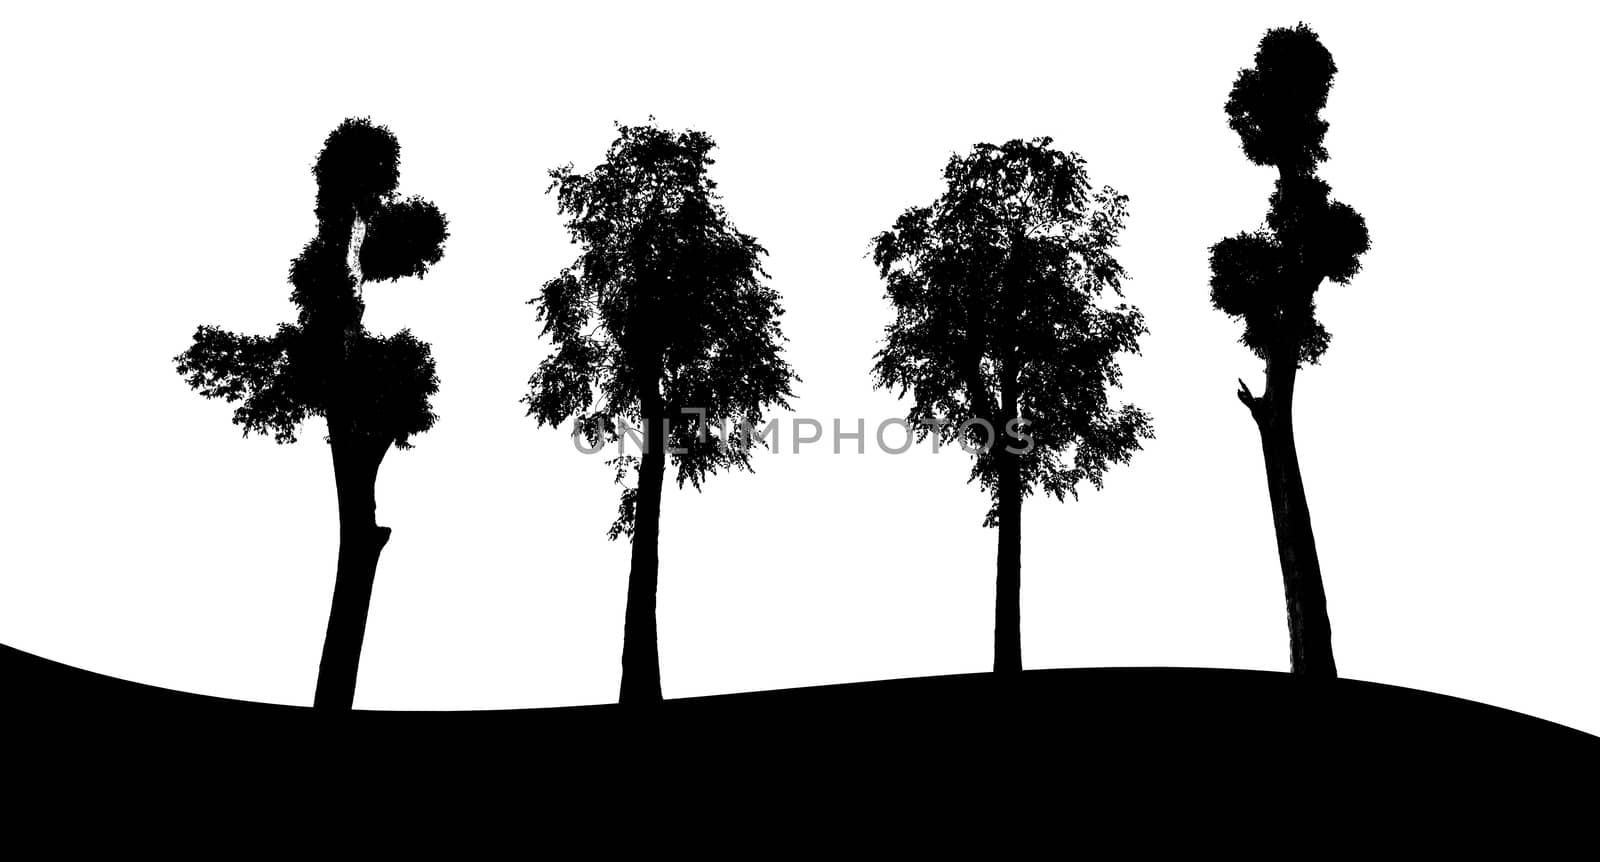 Set of tree silhouette on white background by Thanamat